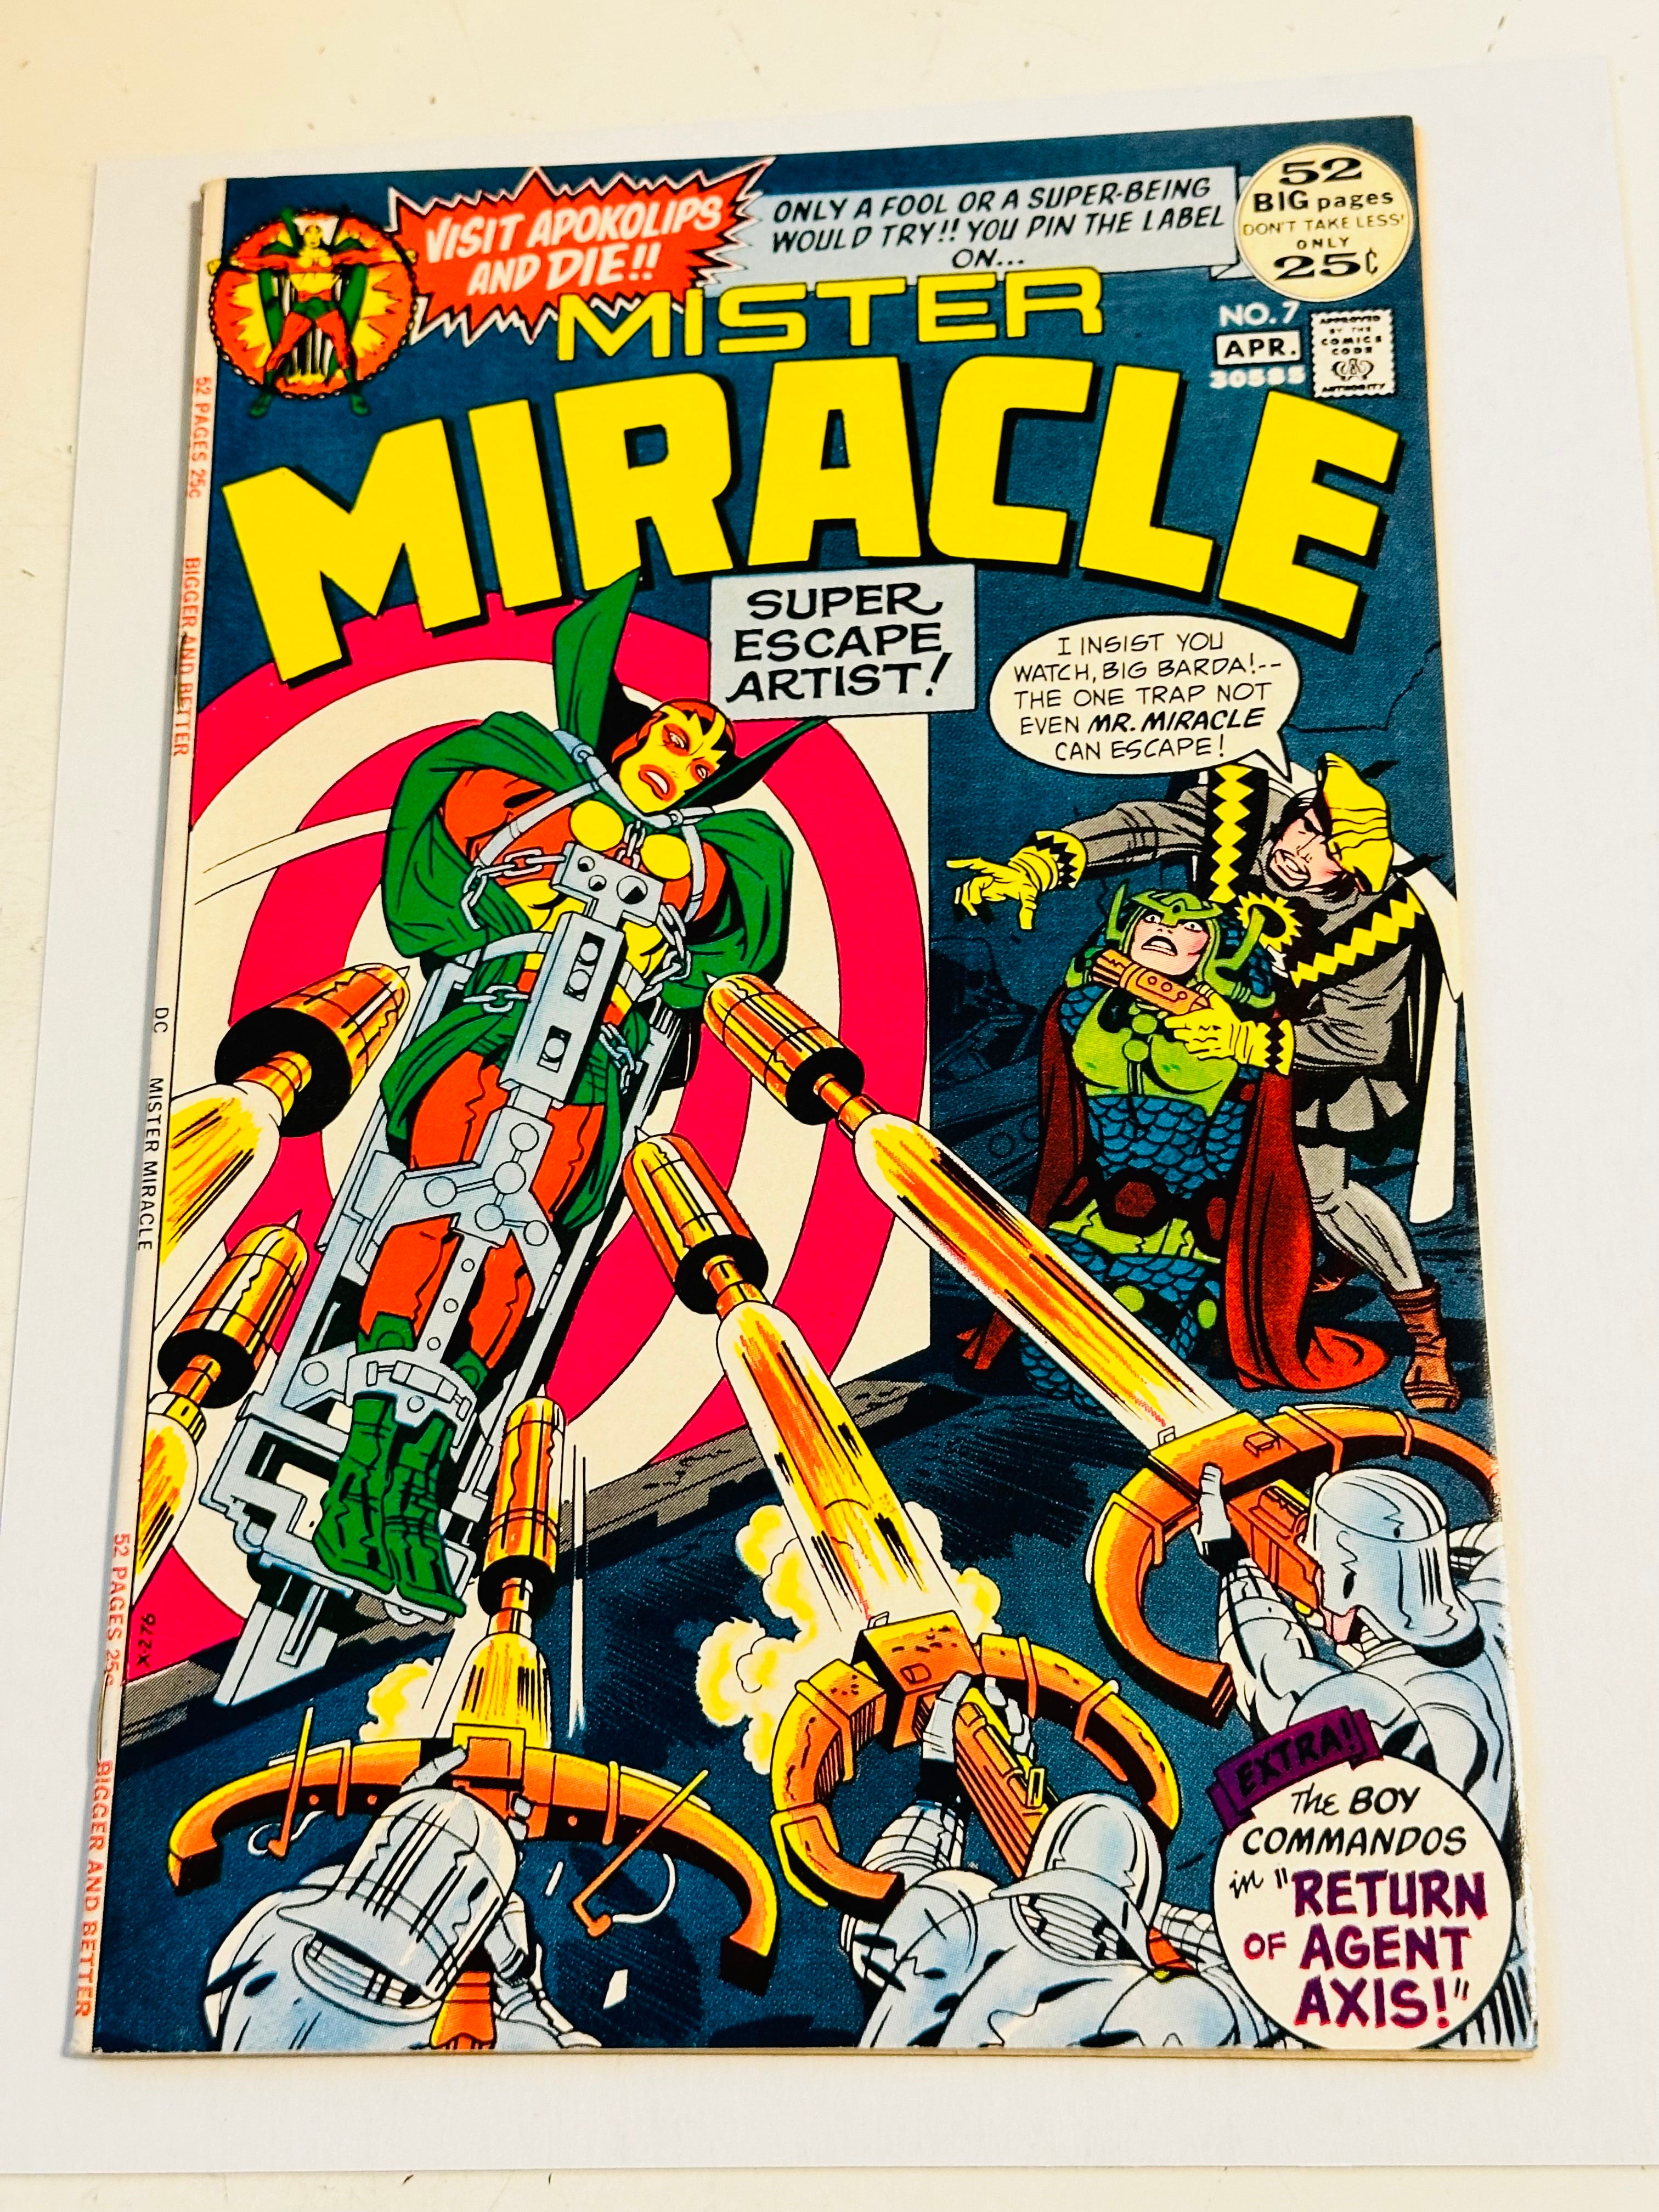 Mr. miracle #7 Vf condition, comic book 1972